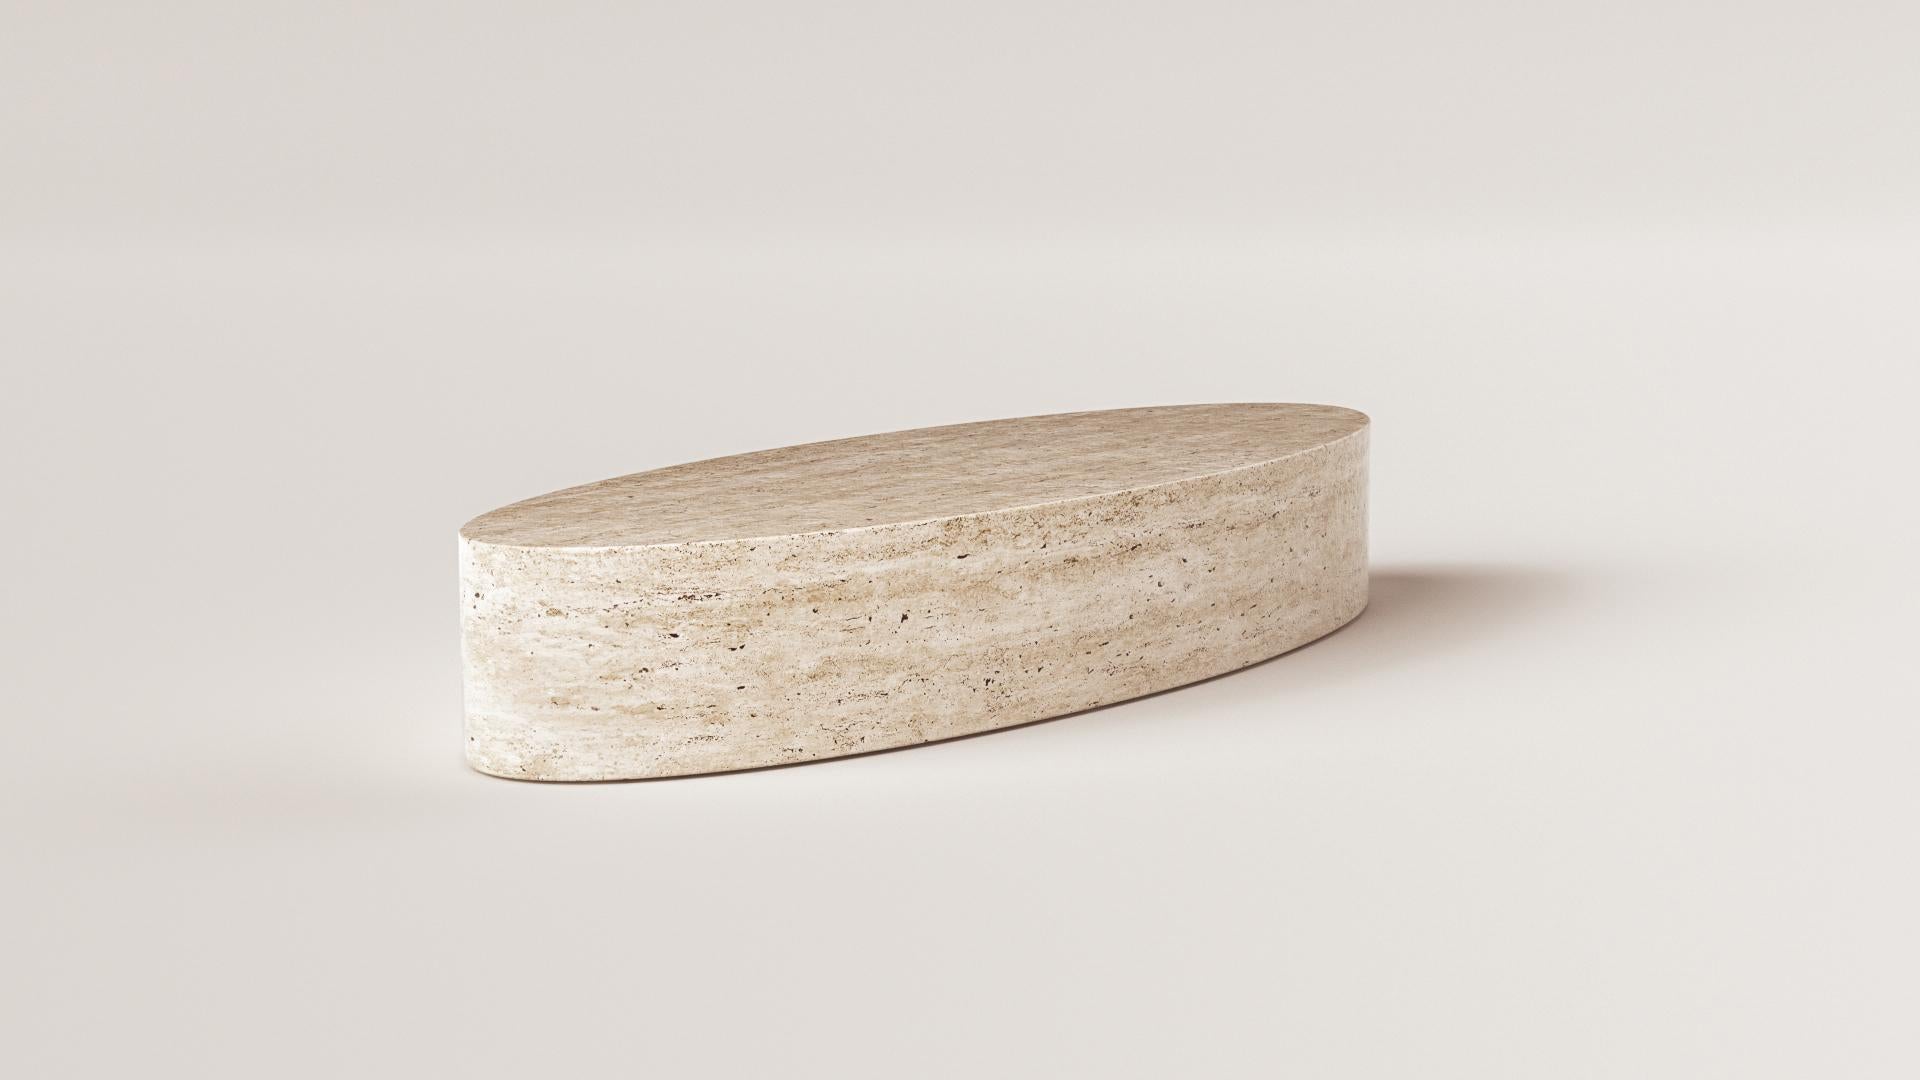 Board Coffee Table by Arthur Vallin
Dimensions: W 198 x D 70x H 35 cm 
Materials: Travertine
Customizable shape and dimensions on demand.

French Artist, Designer, and Creative Director Arthur Vallin hold a master’s degree in Art Direction from the